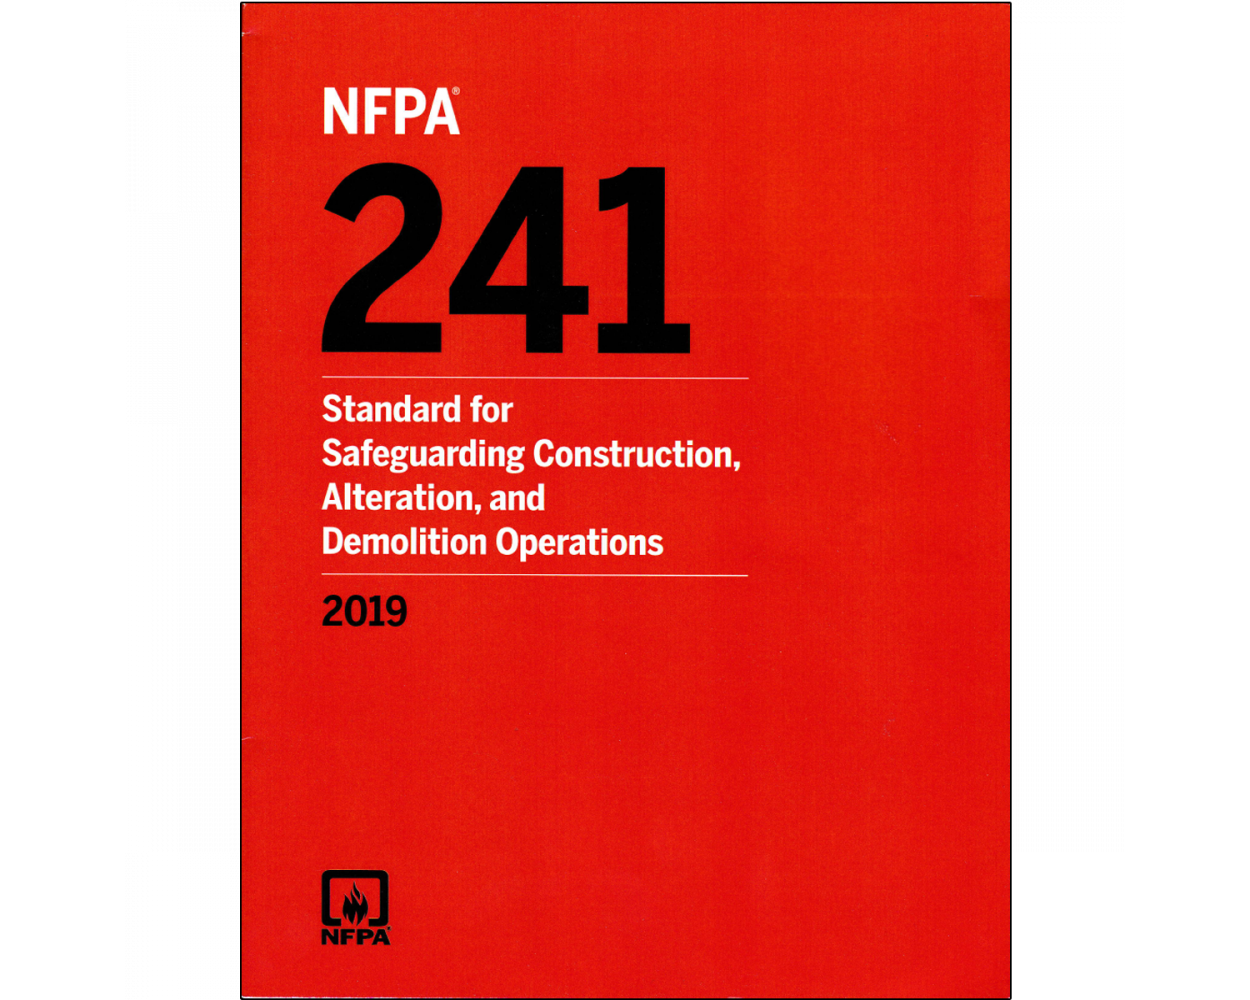 NFPA 241 Standard for Safeguarding Construction, Alteration, and